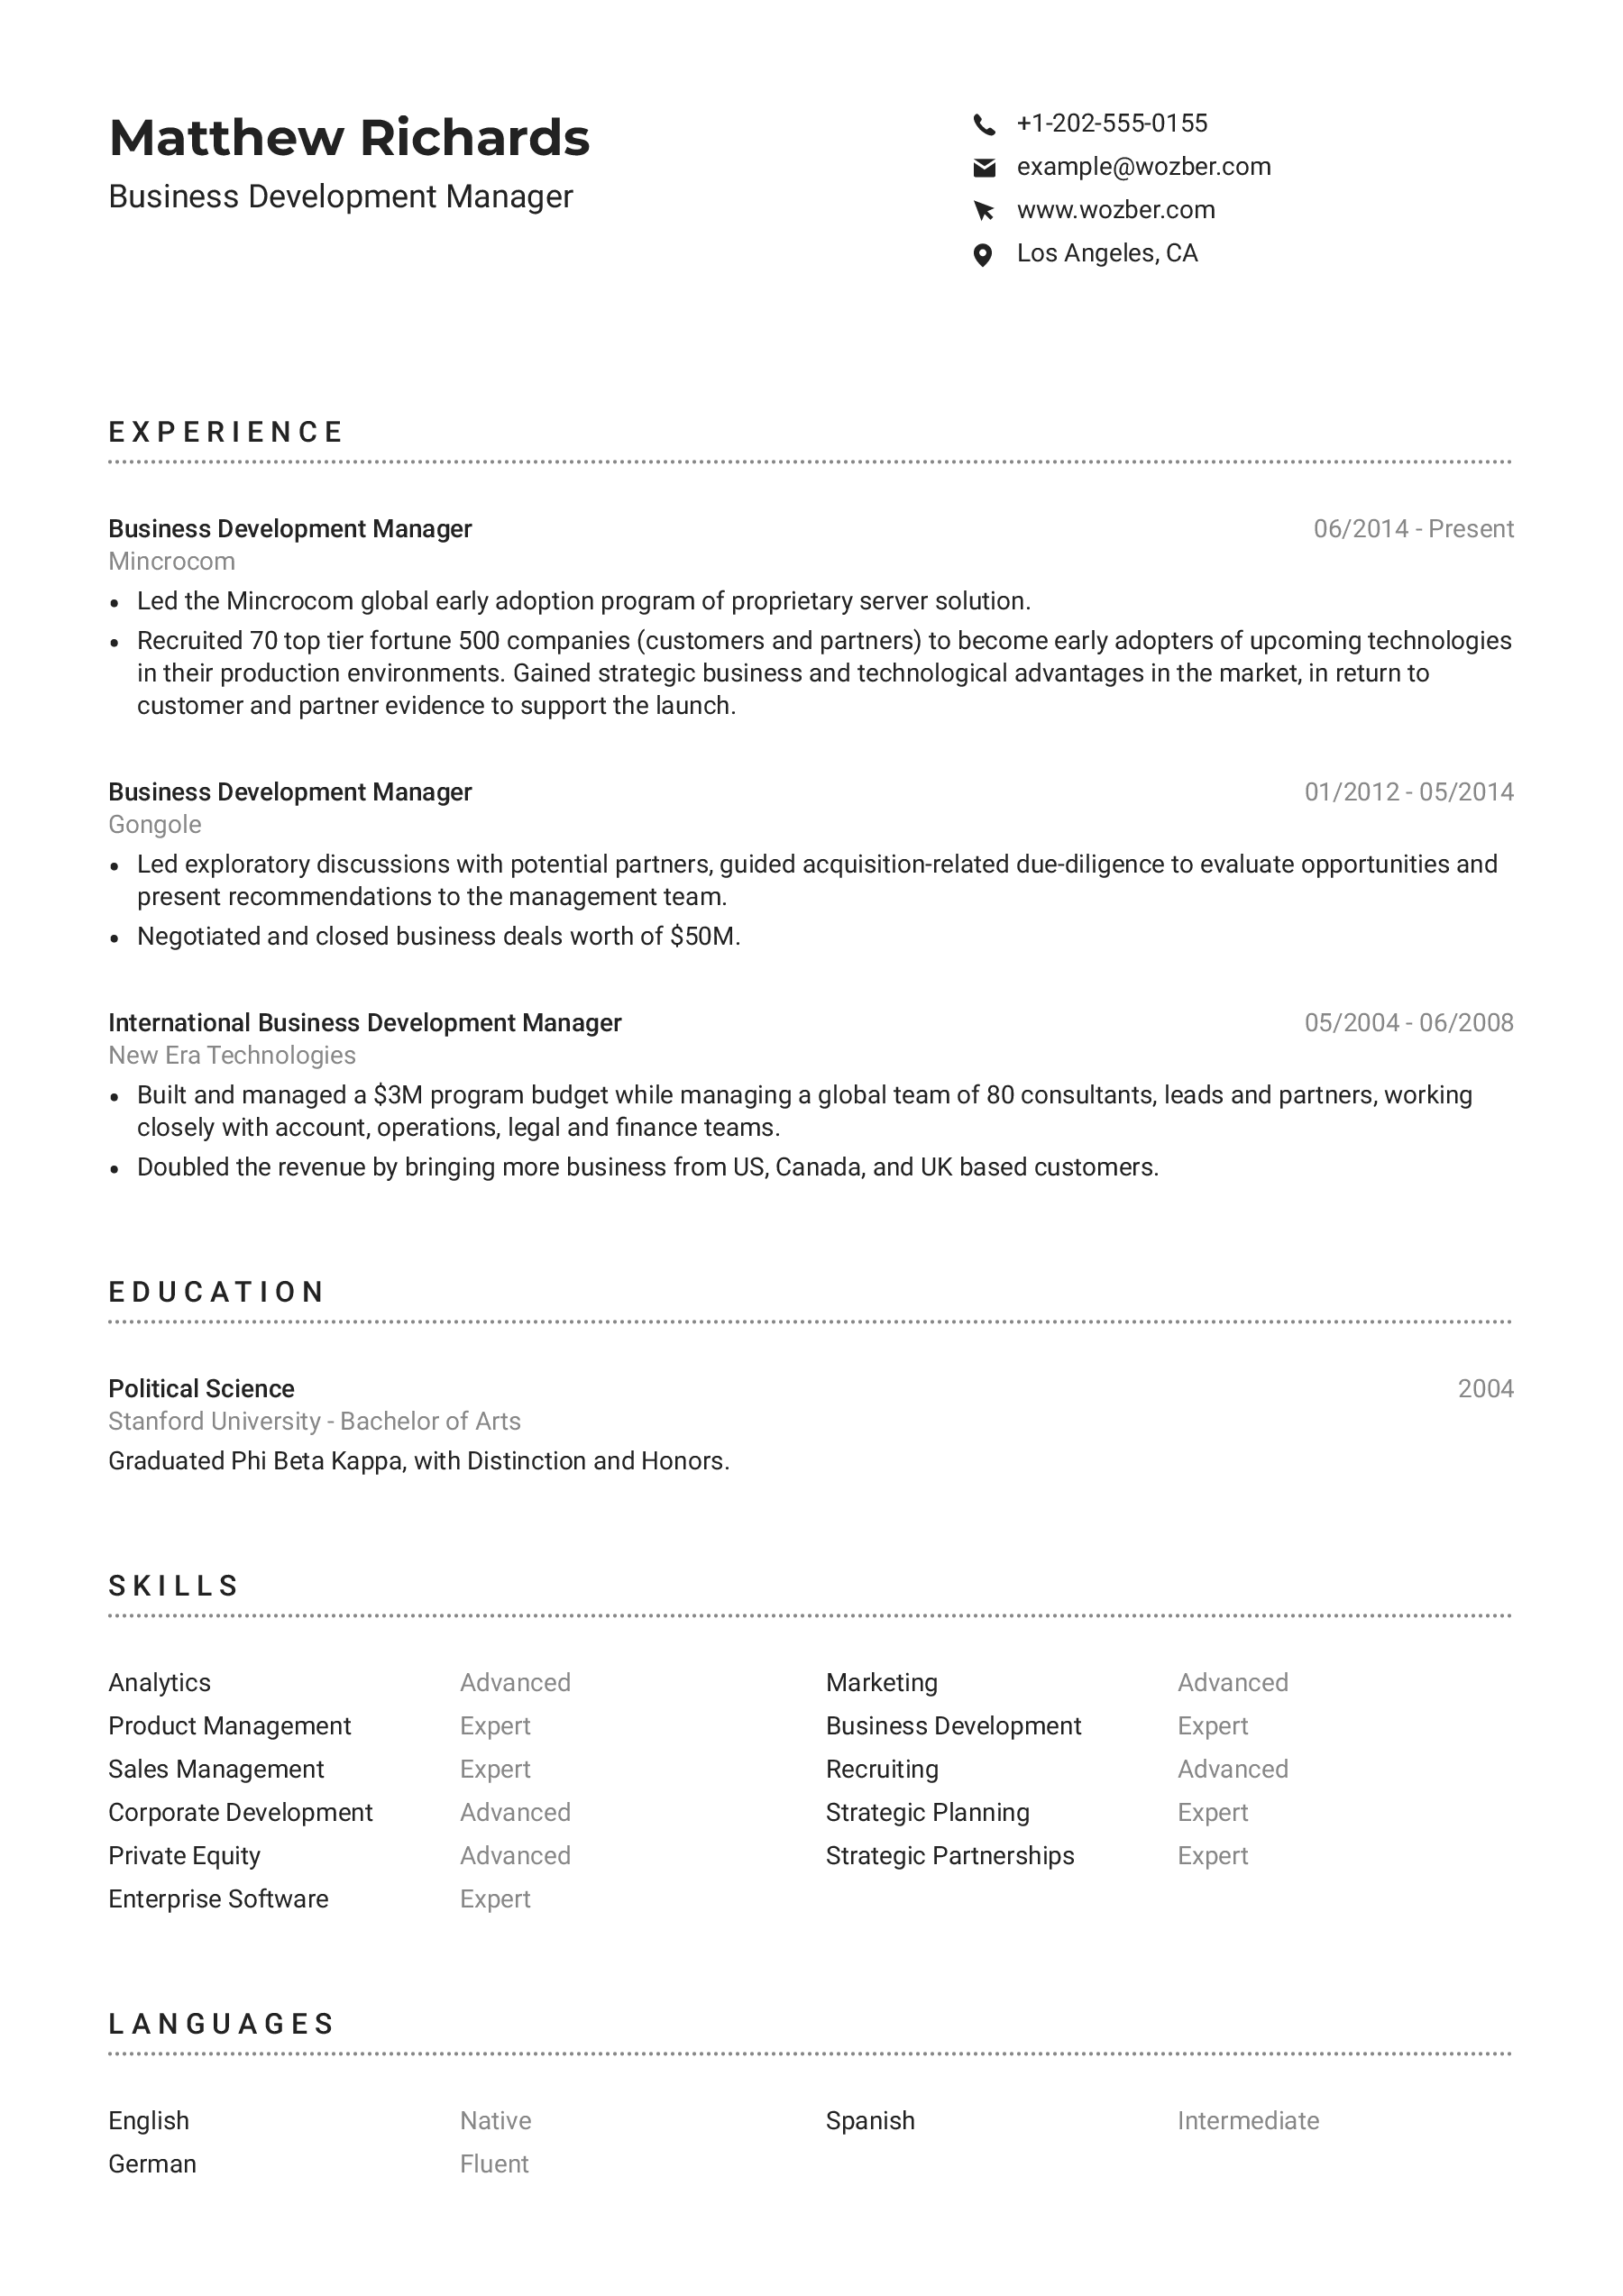 Modern resume example for Business Development Manager position